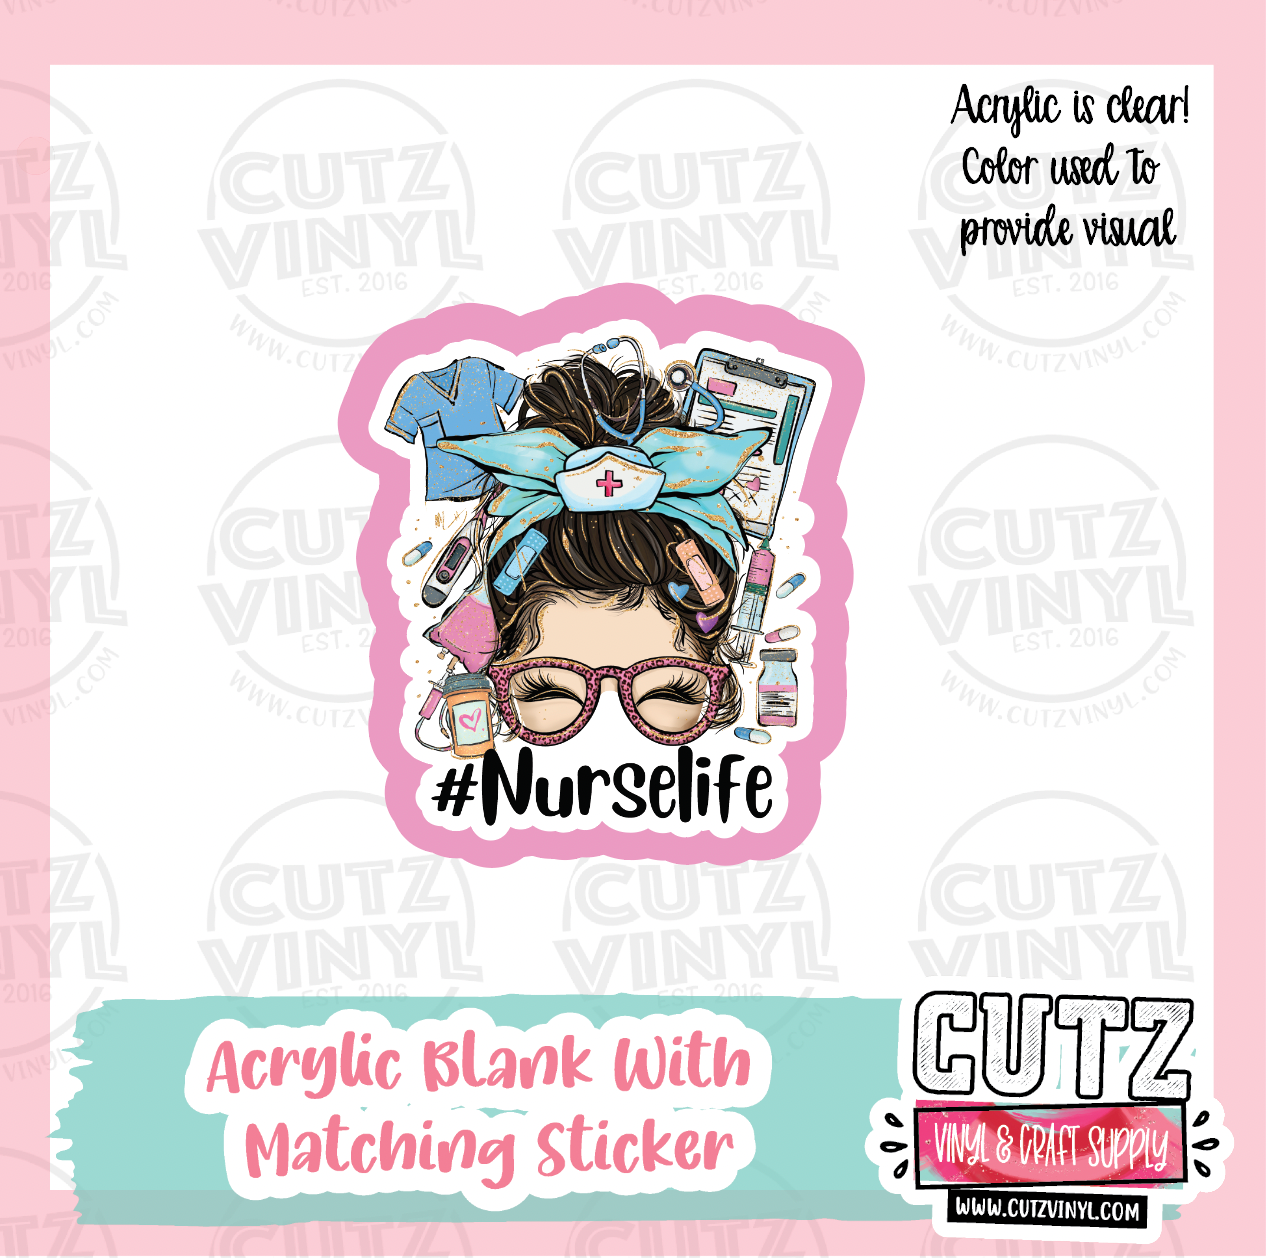 Lab Life - Acrylic Badge Reel Blank and Matching Sticker – Cutz